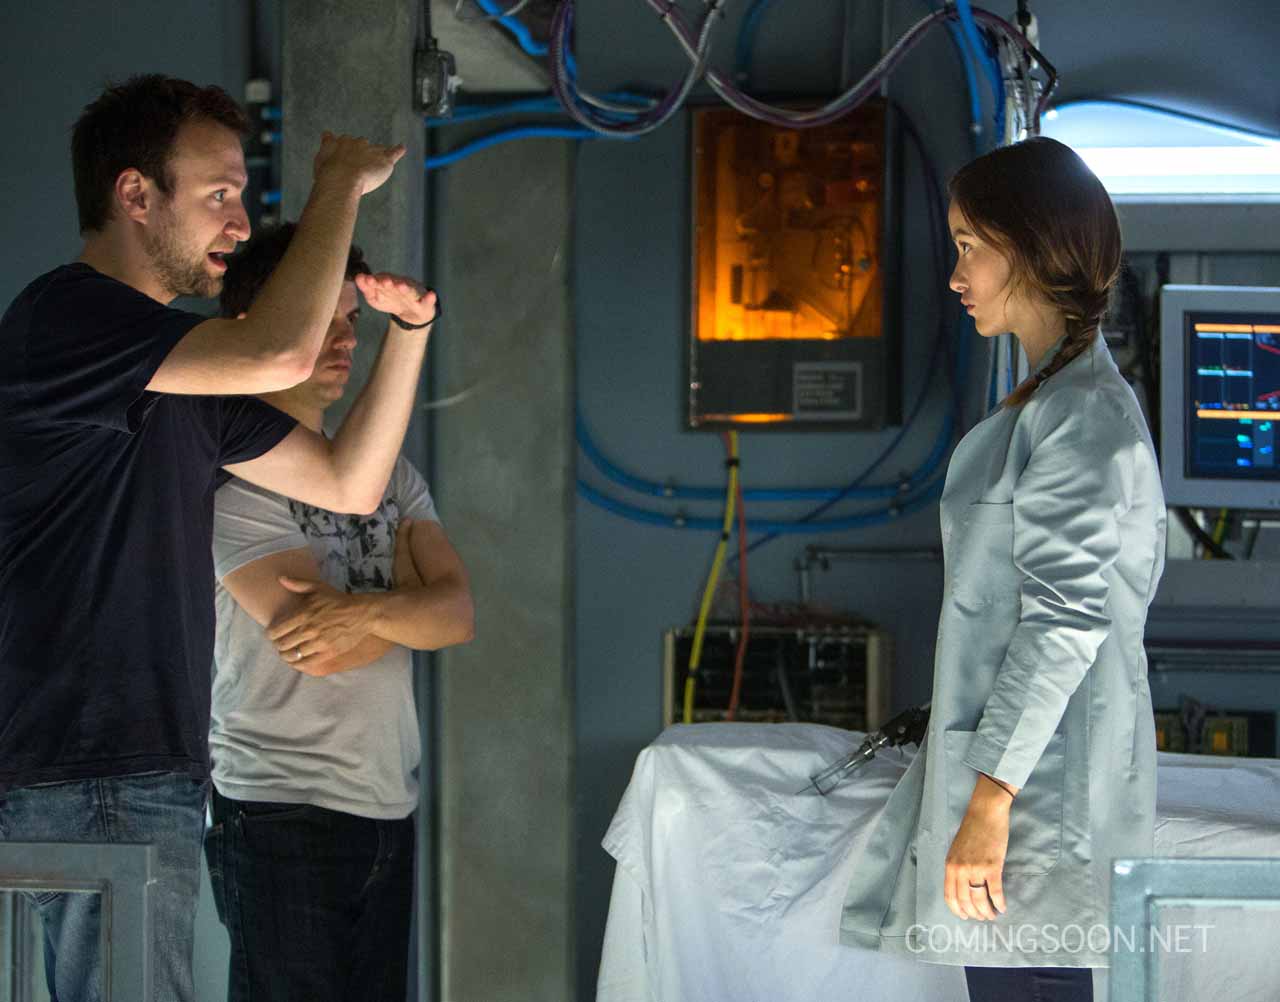 M353  (Left) Director David Gelb sets up a scene with star Olivia Wilde on the set of Relativity Media's "The Lazarus Effect".

Â© 2013 BACK TO LIFE PRODUCTIONS, LLC
 Photo Credit:  Daniel McFadden